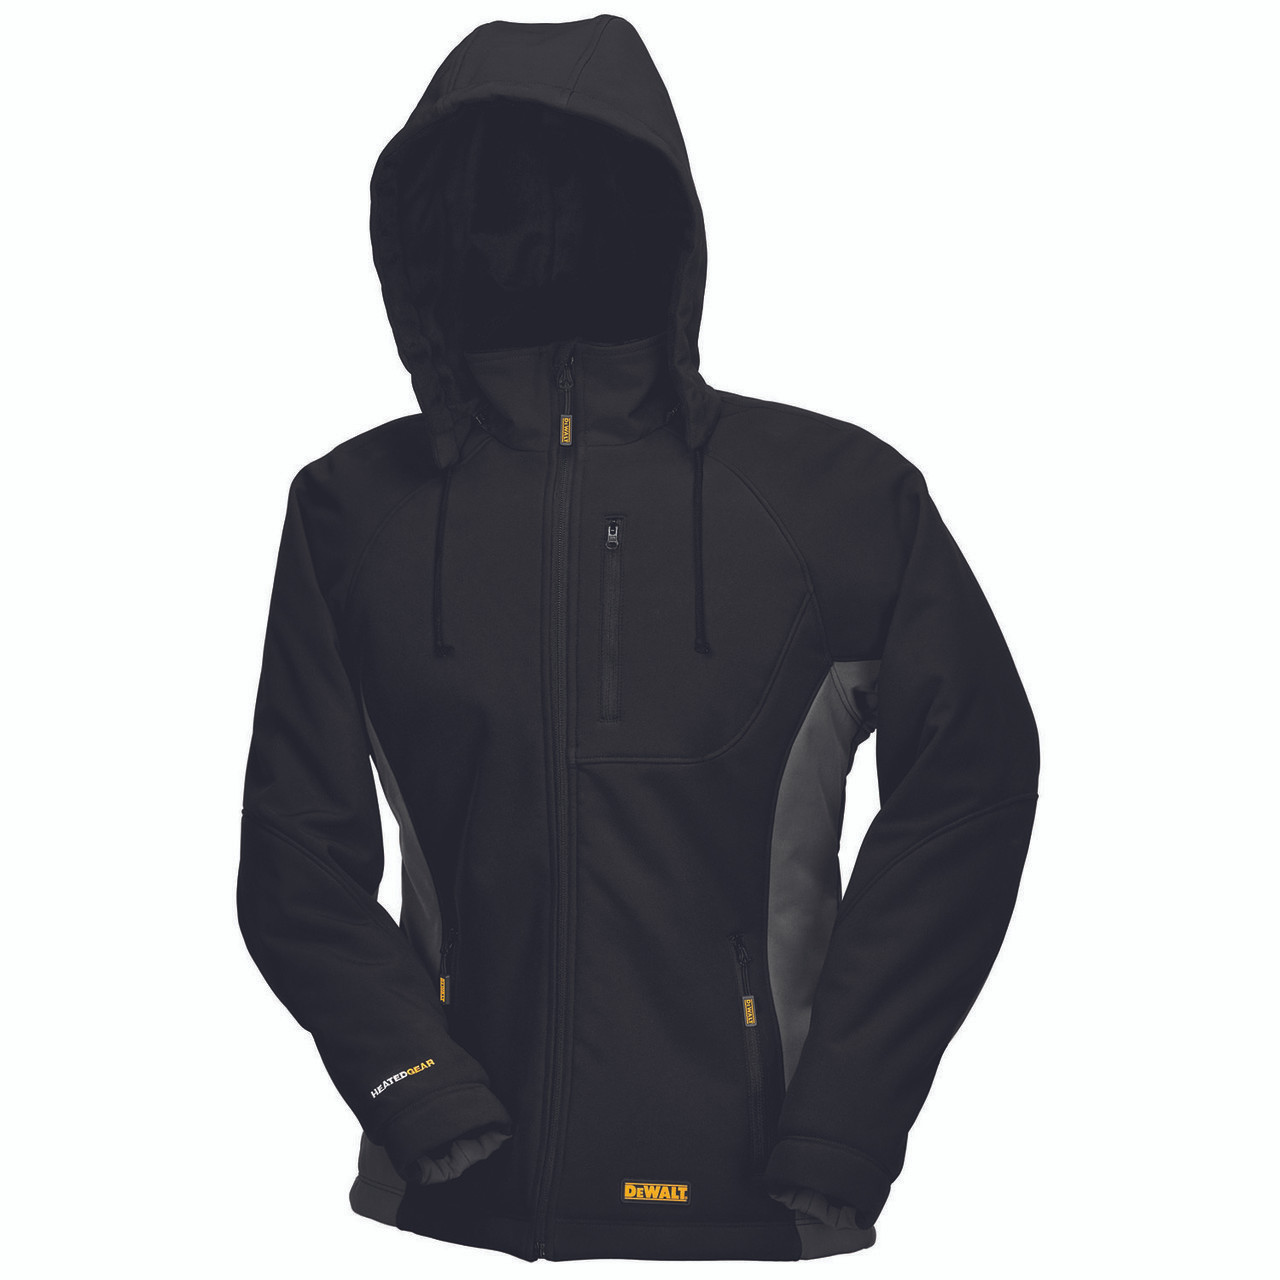 DEWALT デウォルト DCHJ075BーS Heated Quilted Soft Shell Jacket, S, Black 